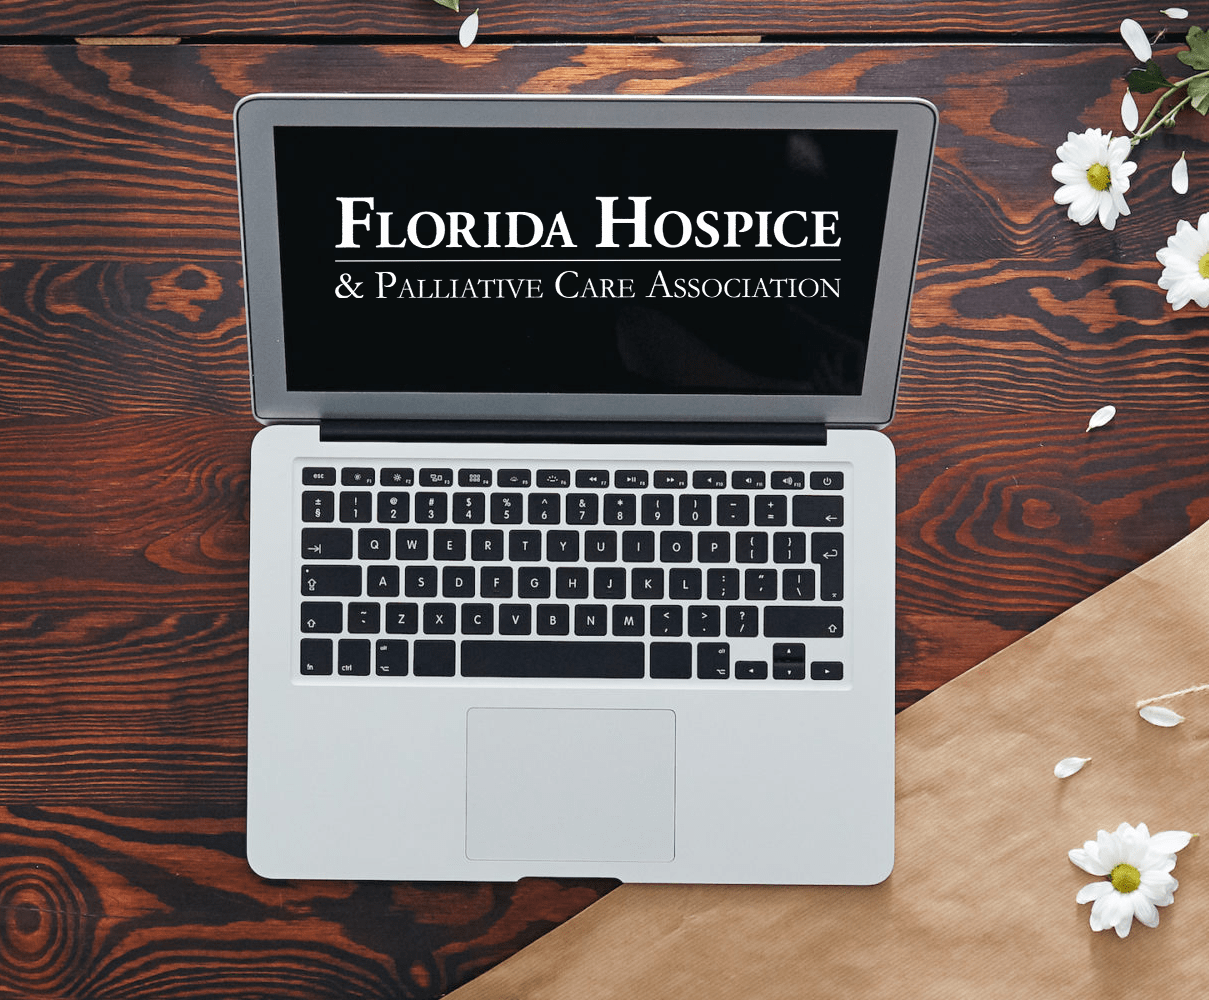 How to Effectively Audit Hospice Documentation